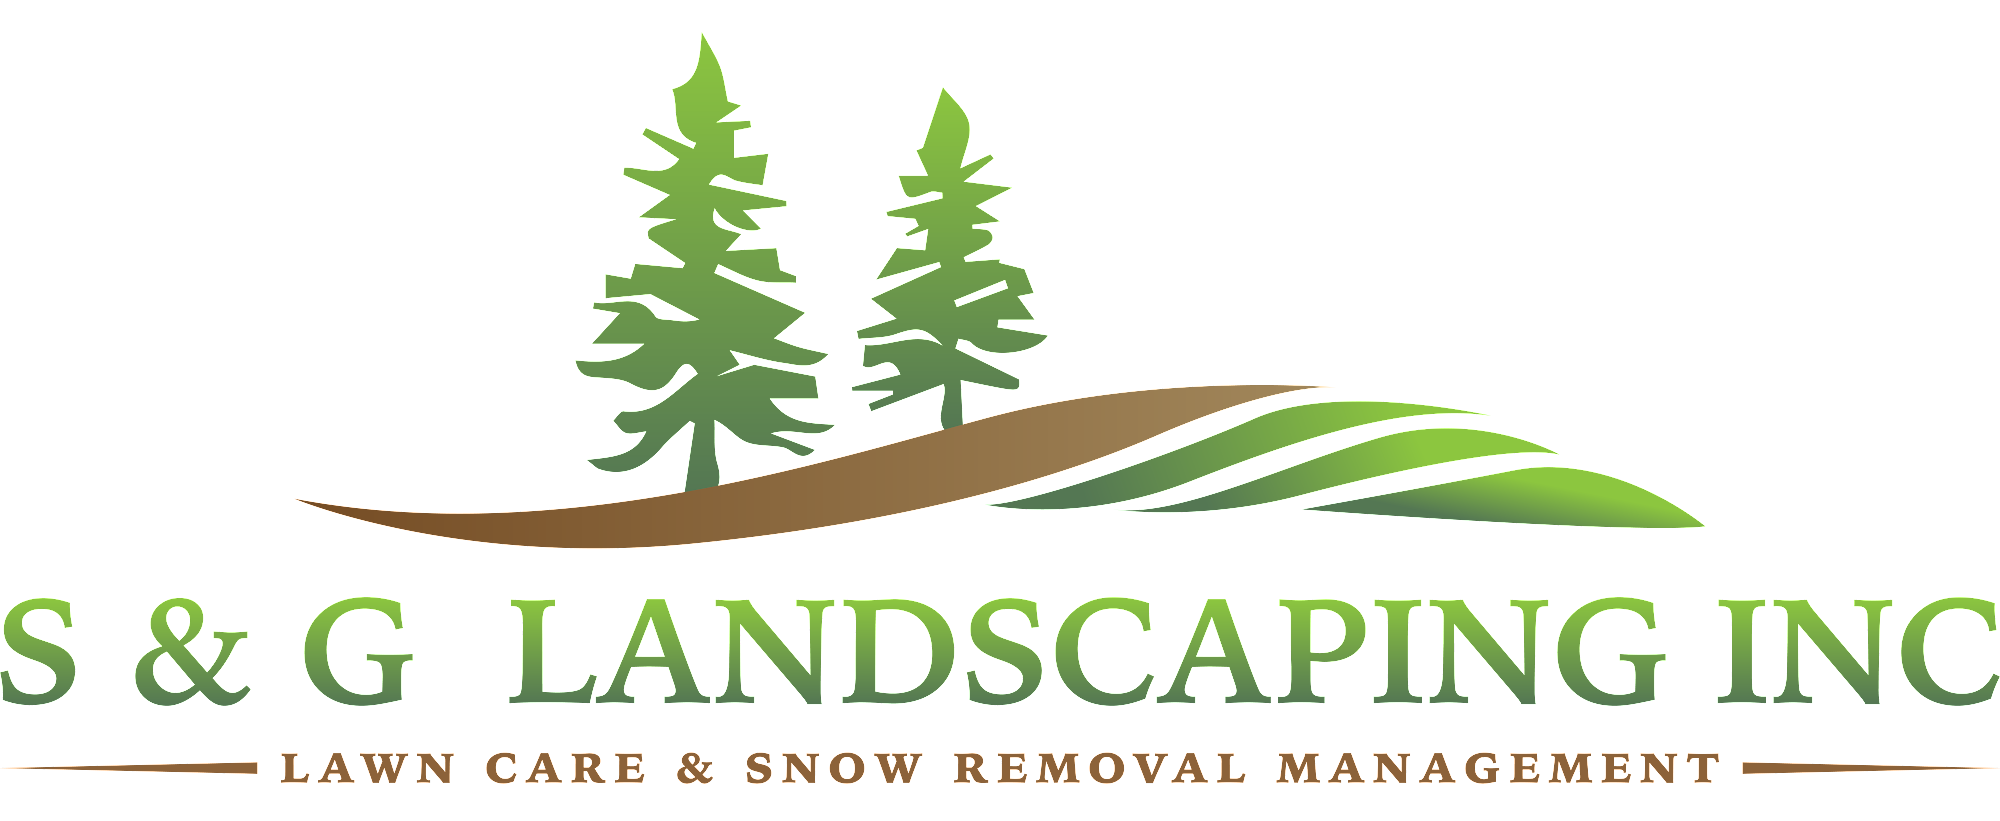 S & G Landscaping Inc